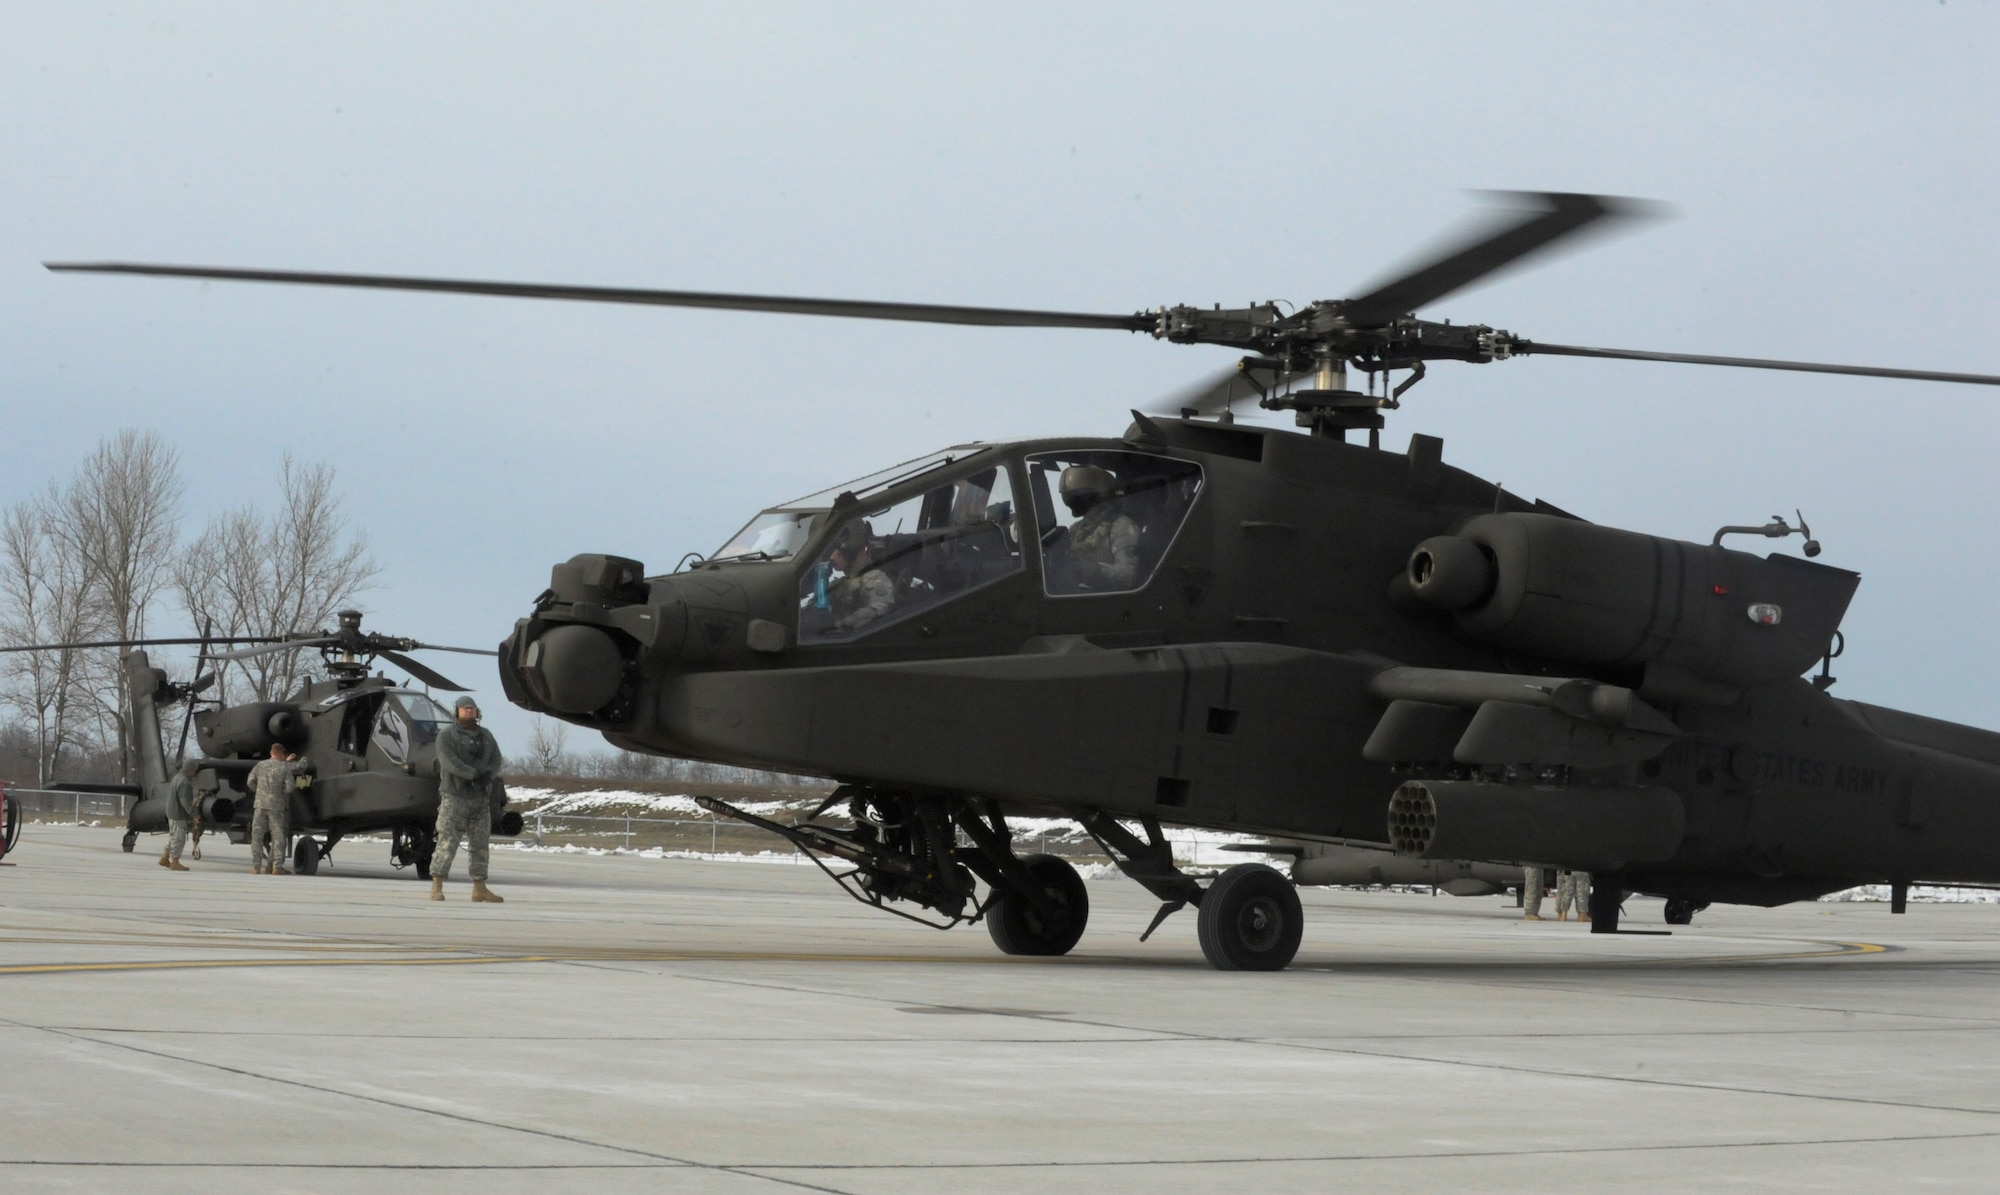 U.S. Army AH-64 Apache Longbows and pilots from the 1-135th Attack Reconnaissance Battalion at Whiteman Air Force Base, Mo., prepare March 27, 2013, for their deployment to Afghanistan. The Apaches first came to Whiteman AFB in 2002. (U.S. Air Force photo by Airman 1st Class Shelby R. Orozco/Released)